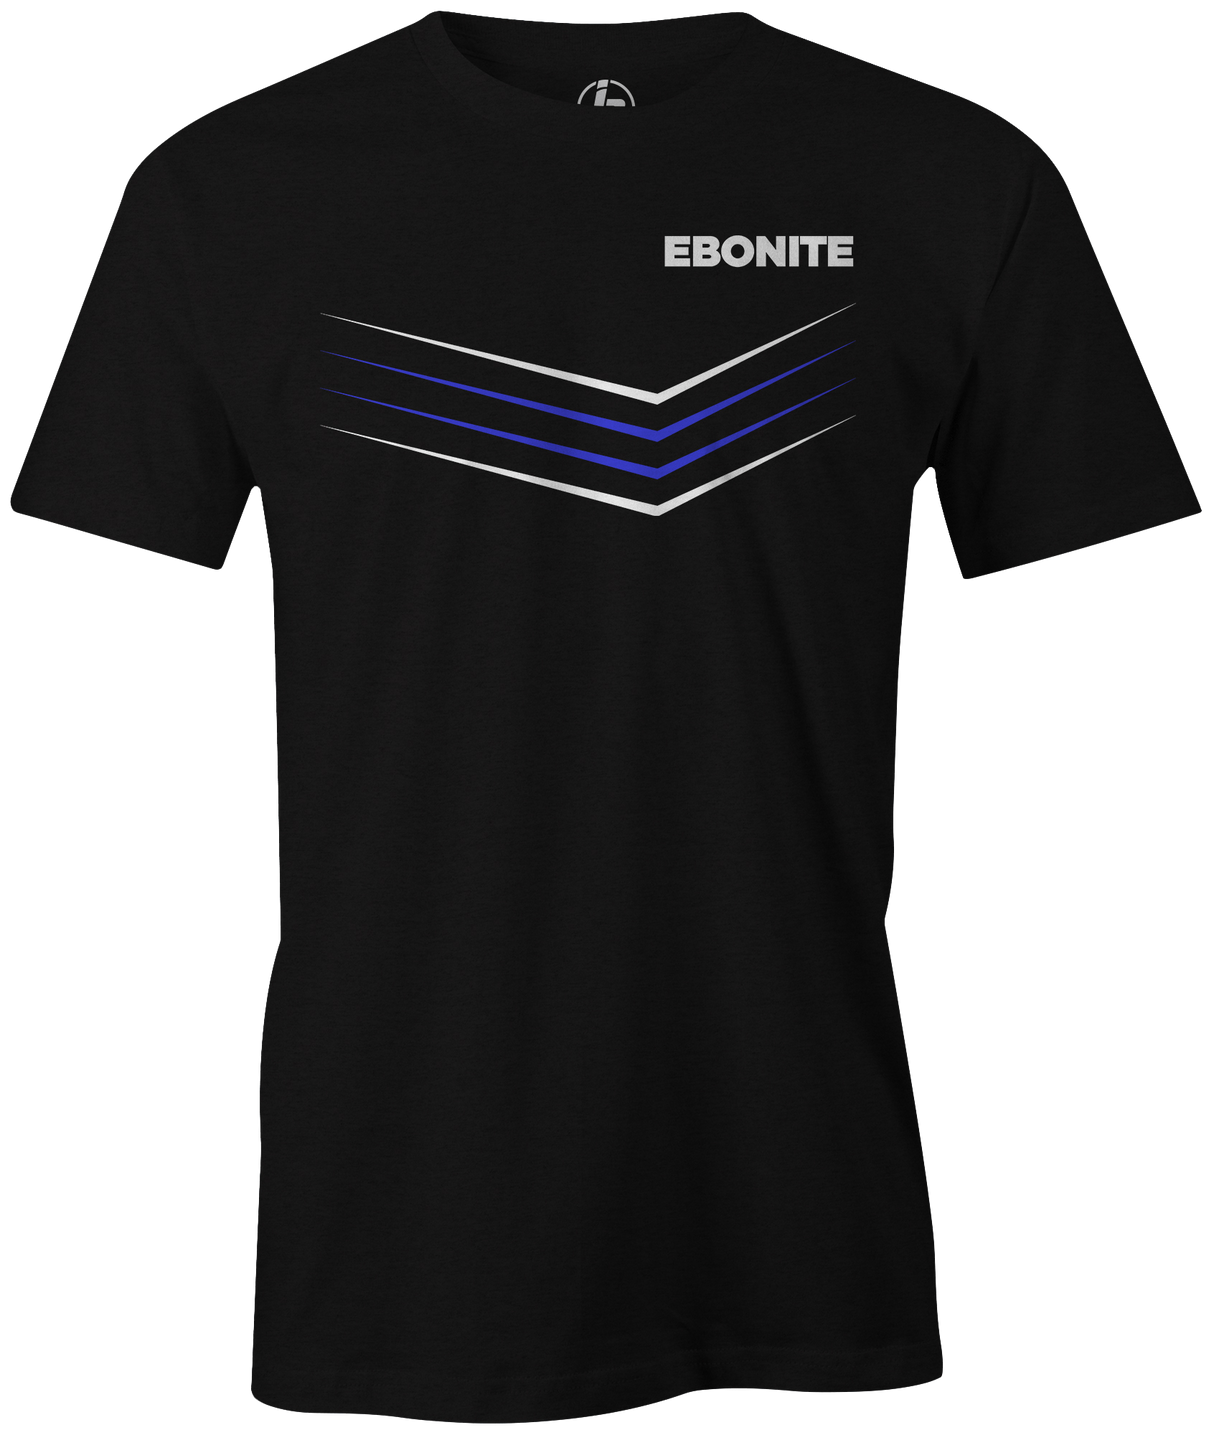 Ebonite  Sport! This new tee is the perfect shirt for any Ebonite  bowling fan. Available in multiple colors.  Hit the lanes in this awesome t-shirt and show everyone that you are a part of the team!  Tshirt, tee, tee-shirt, tee shirt, Pro shop. League bowling team shirt. PBA. PWBA. USBC. Junior Gold. Youth bowling. Tournament t-shirt. Men's. Bowling Ball.